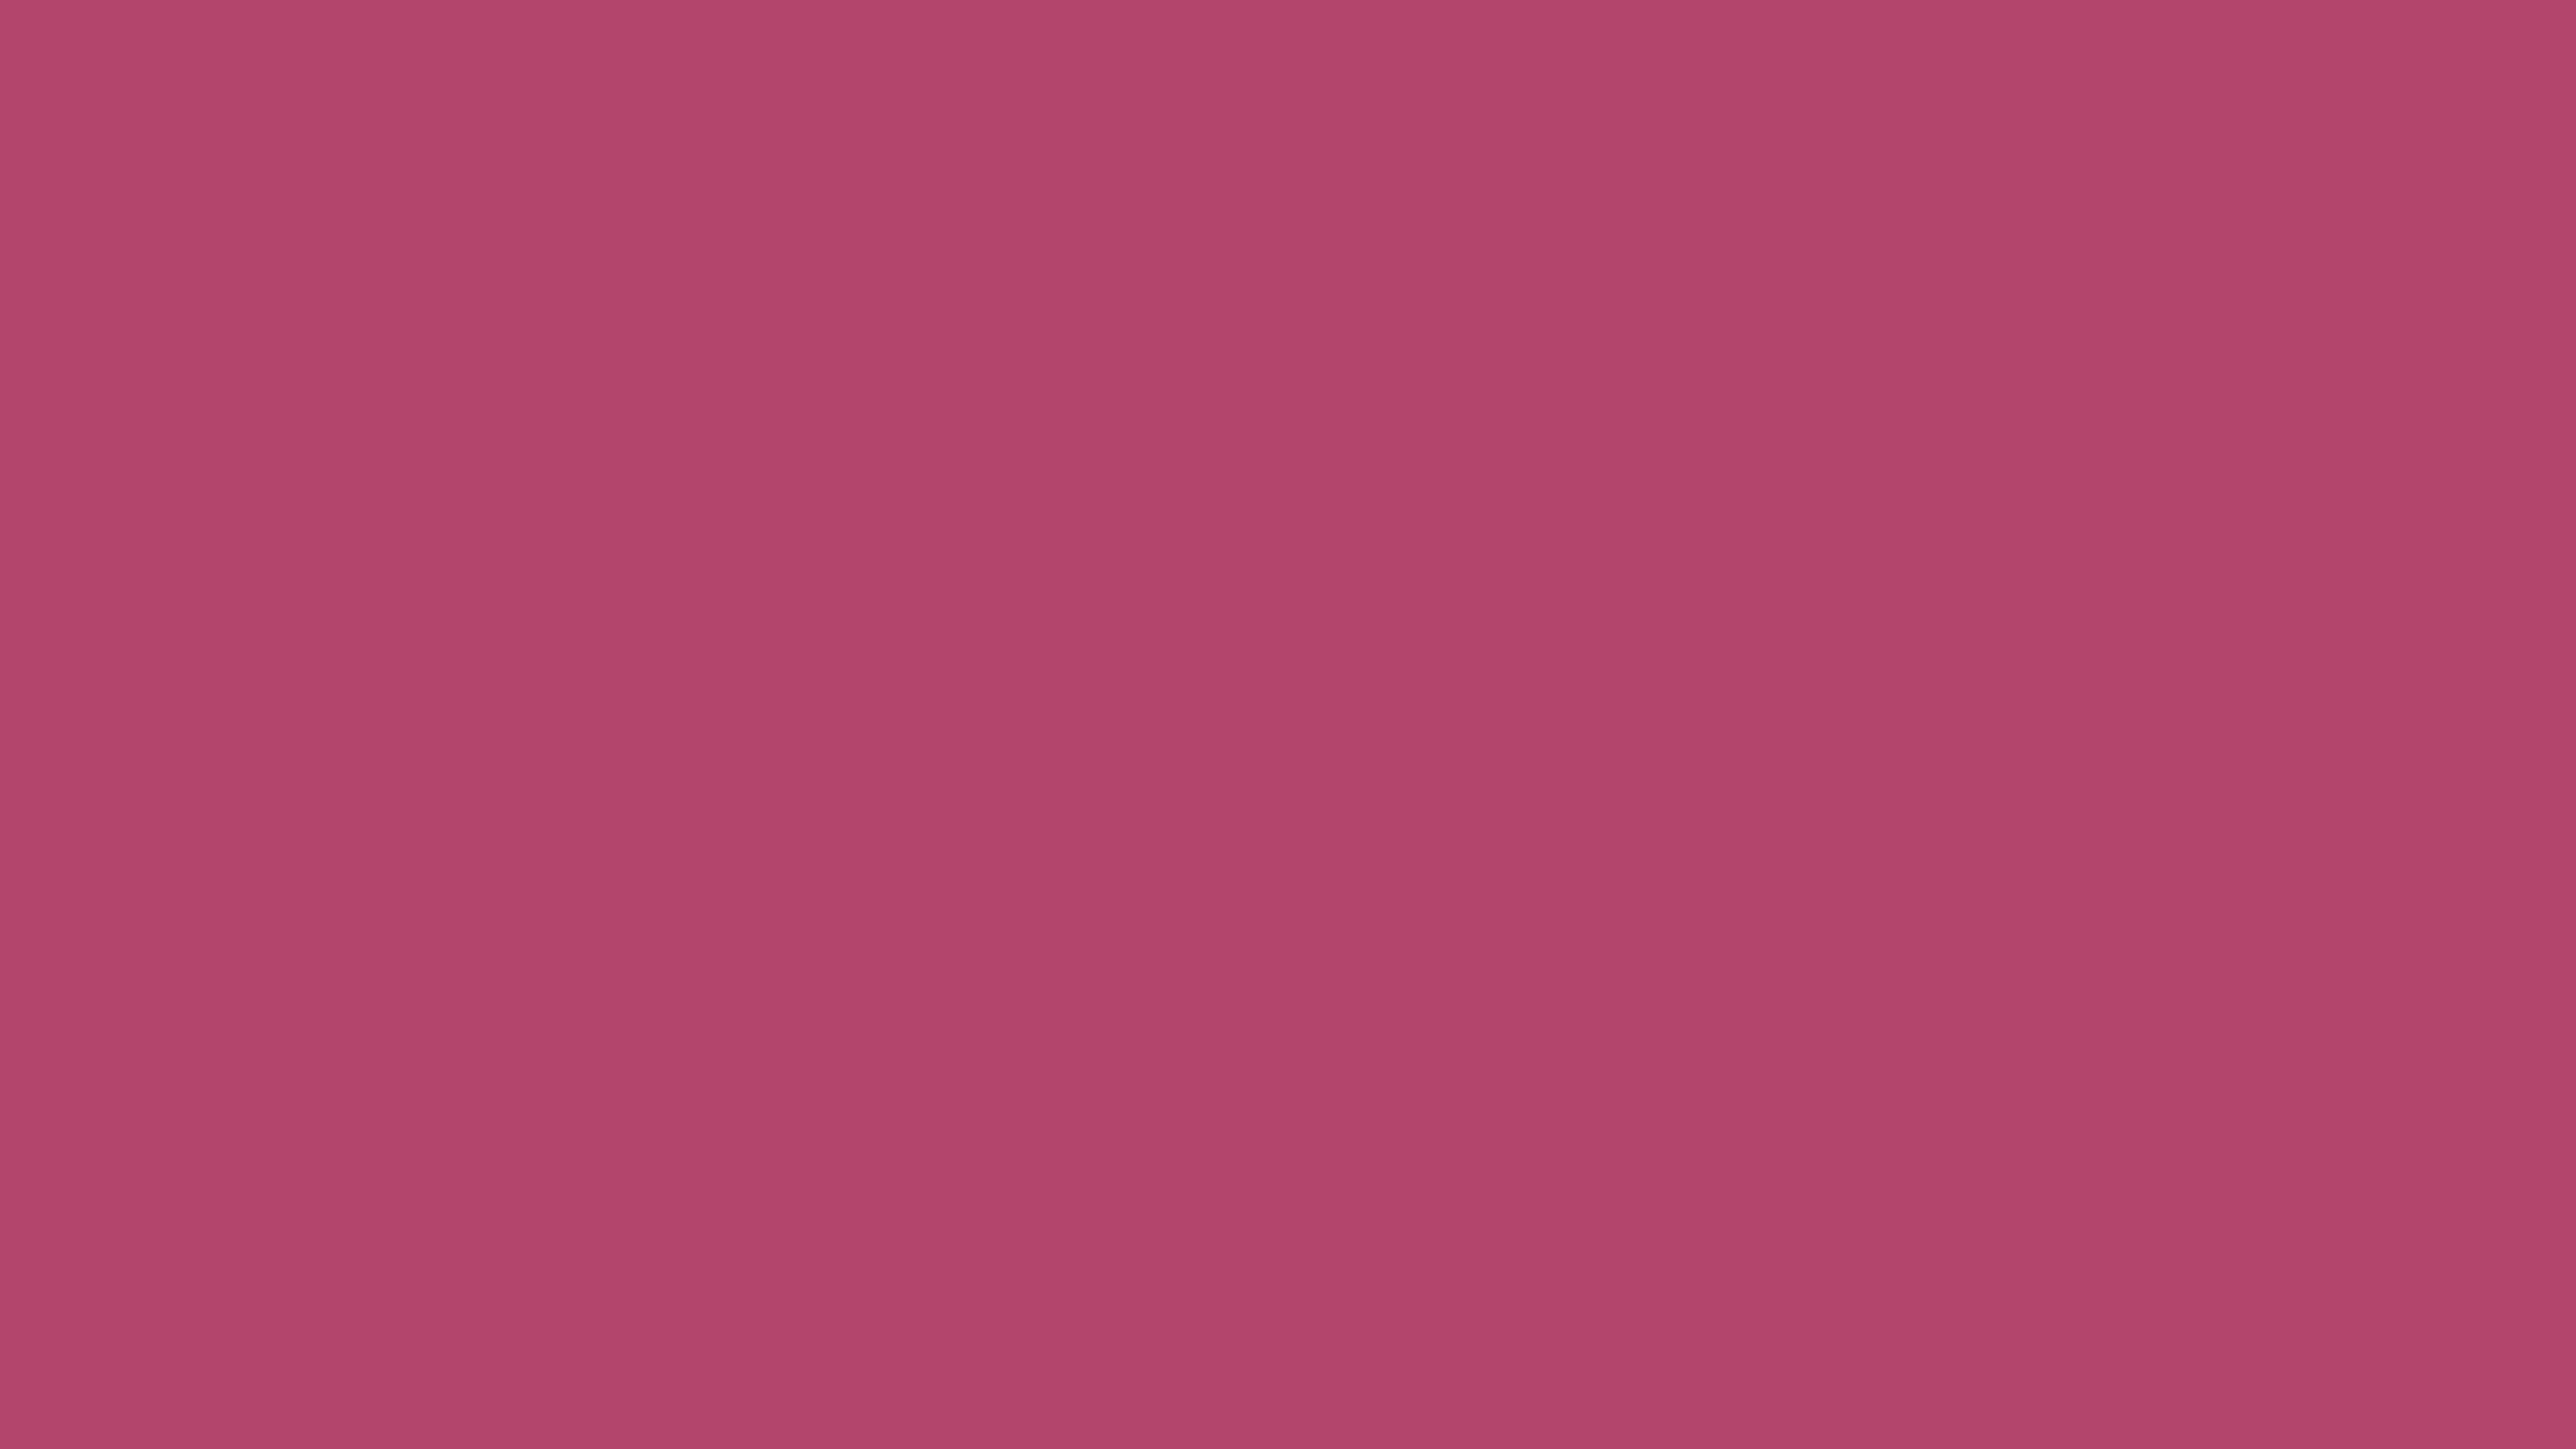 7680x4320 Raspberry Rose Solid Color Background